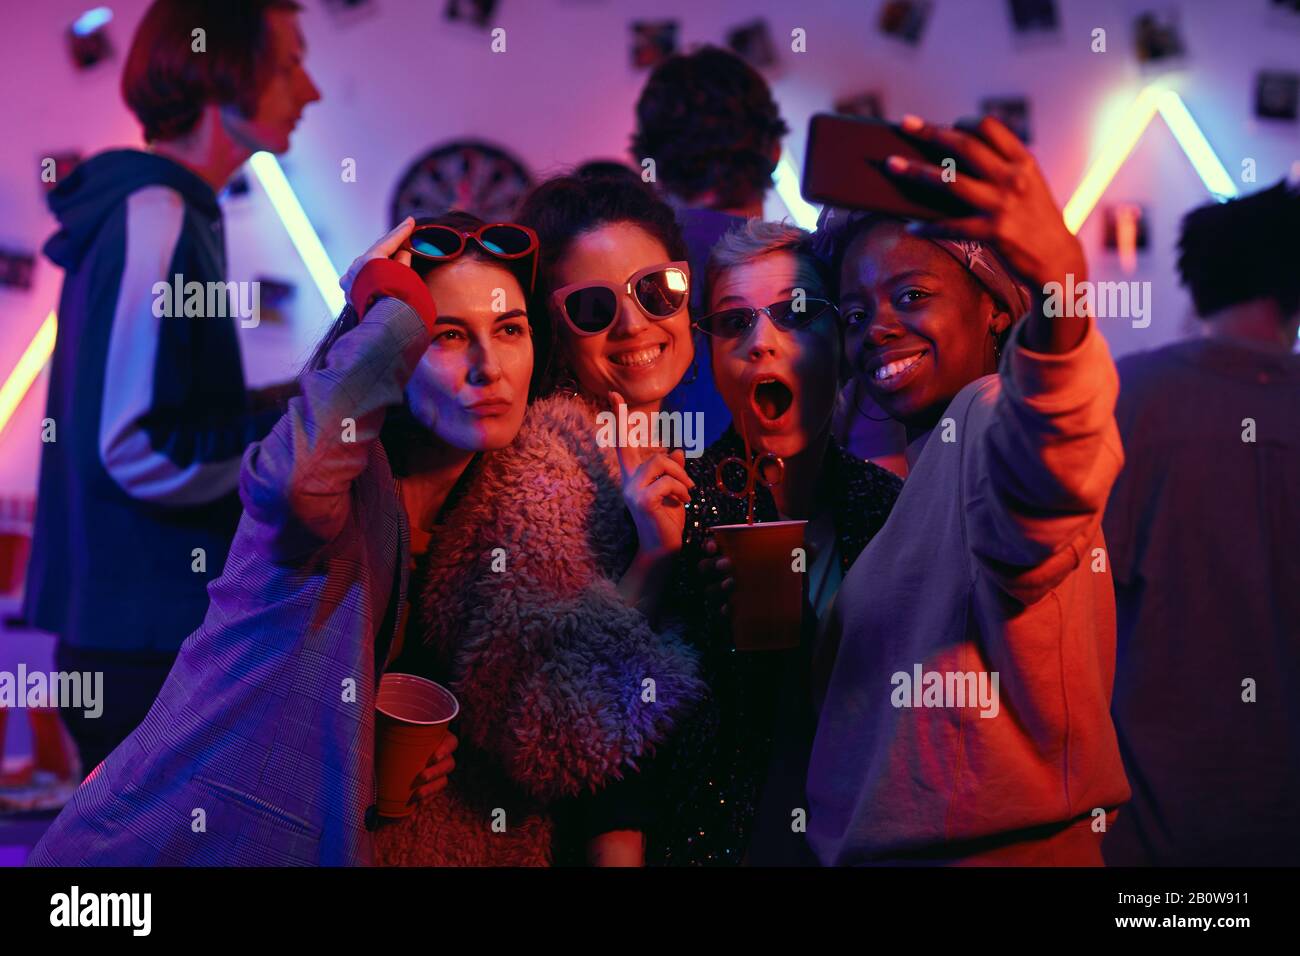 Smartphone Obsession At Night Club Party Stock Photo, Picture and Royalty  Free Image. Image 78105137.